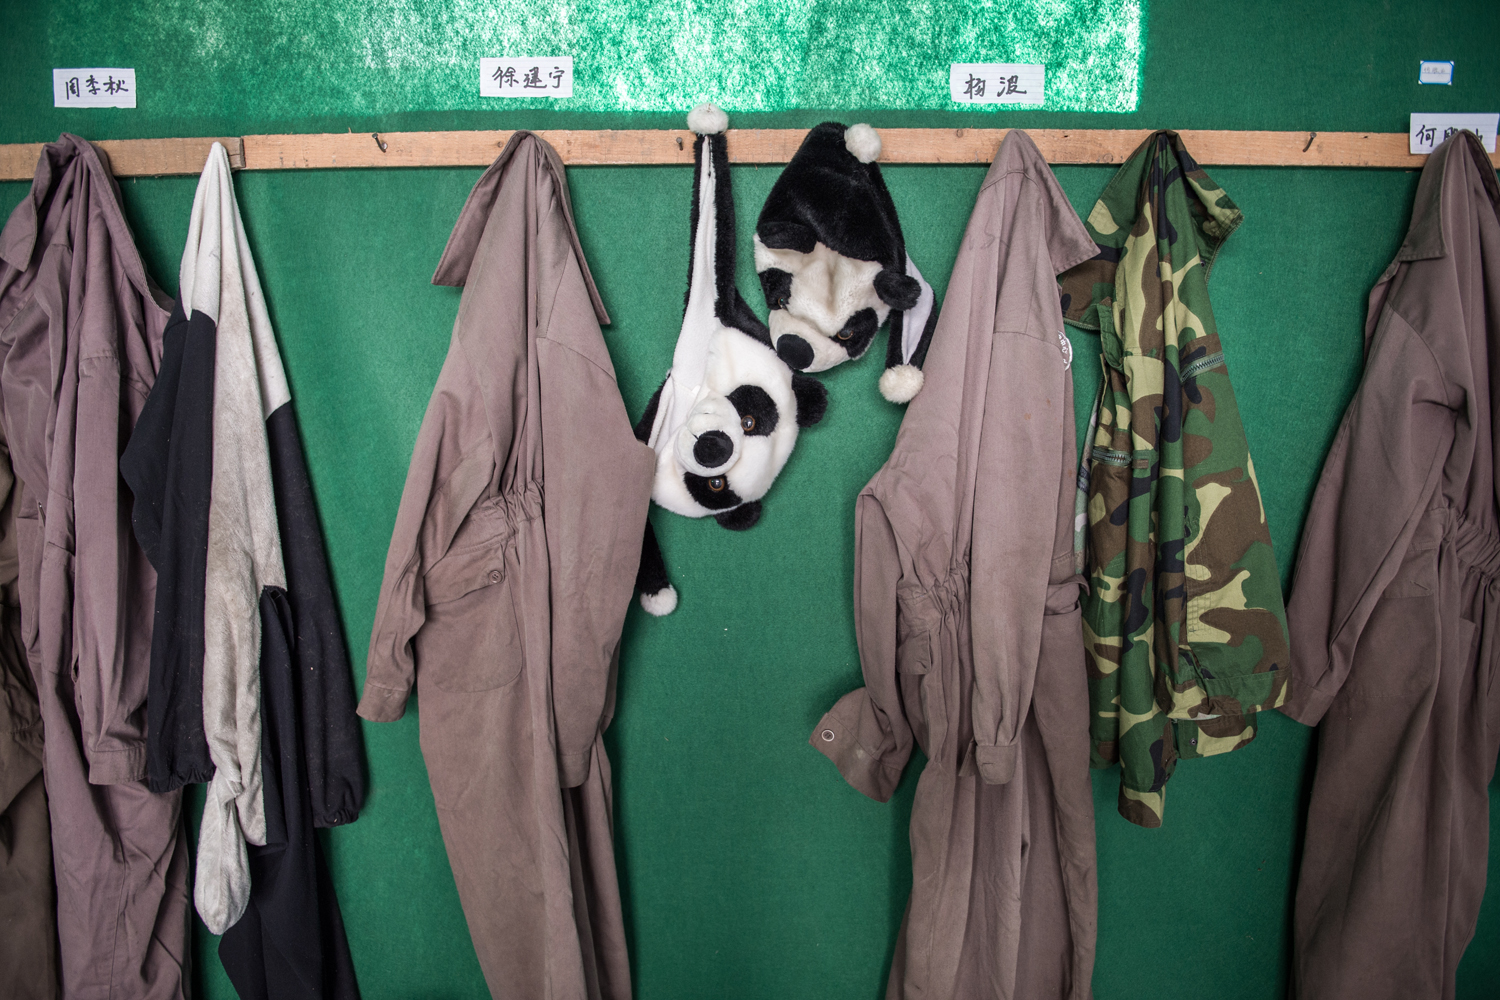 Panda costumes that are worn by caretakers hang inside theemployee room at the Wolong Nature Reserve managed by the ChinaConservation and Research Center for the Giant Panda. Babies are bornin a quiet moss and as they grow they are moved to progressivelybigger, more complex and “wilder” enclosures, eventually learning toclimb and forage for themselves. From birth,a panda slated for releasewill never see a human, its training administered equally by itsmother and its unseen keepers in panda costumes.